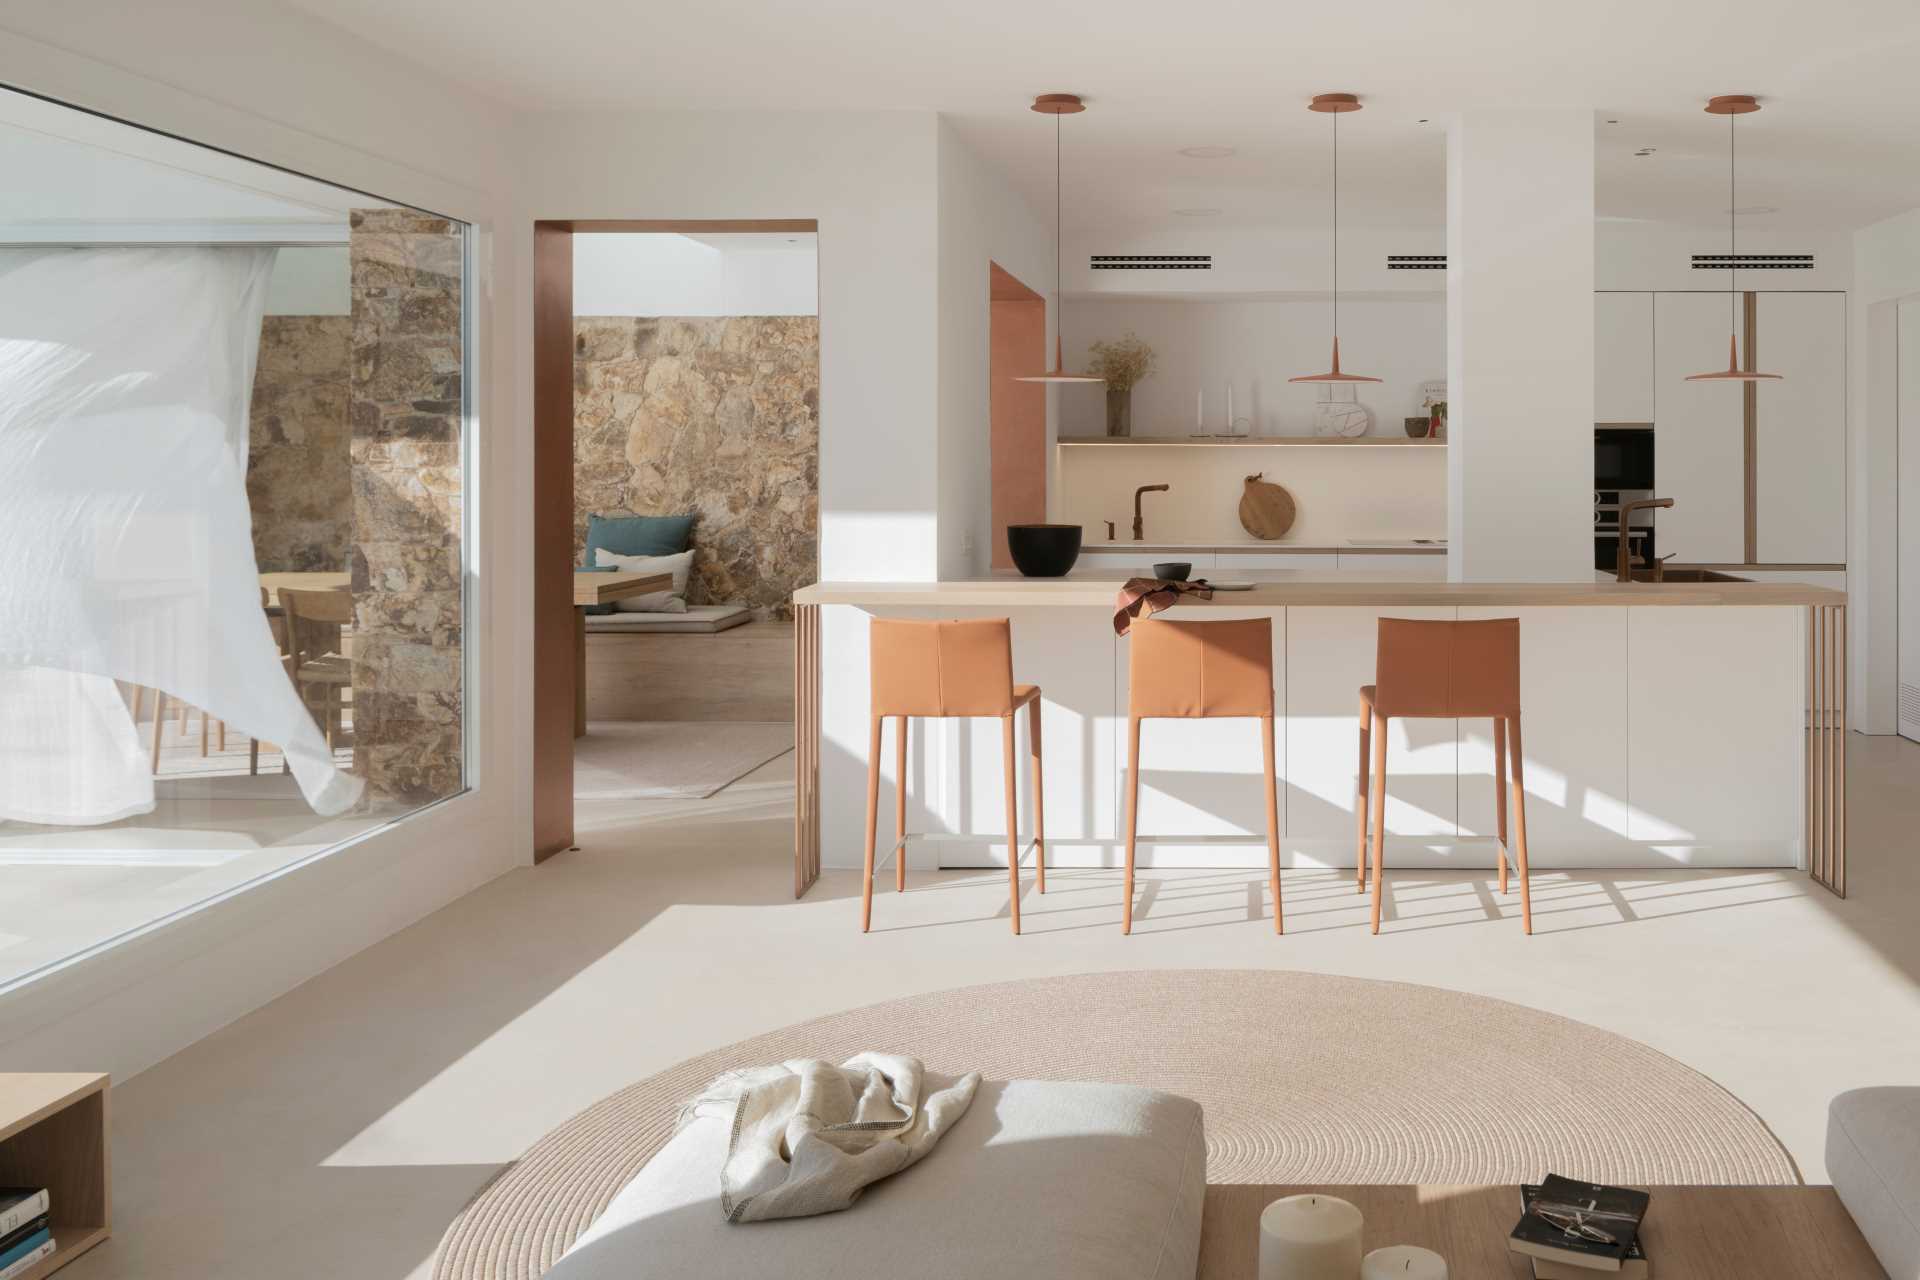 A modern kitchen with a white and copper color palette, and a long breakfast bar.